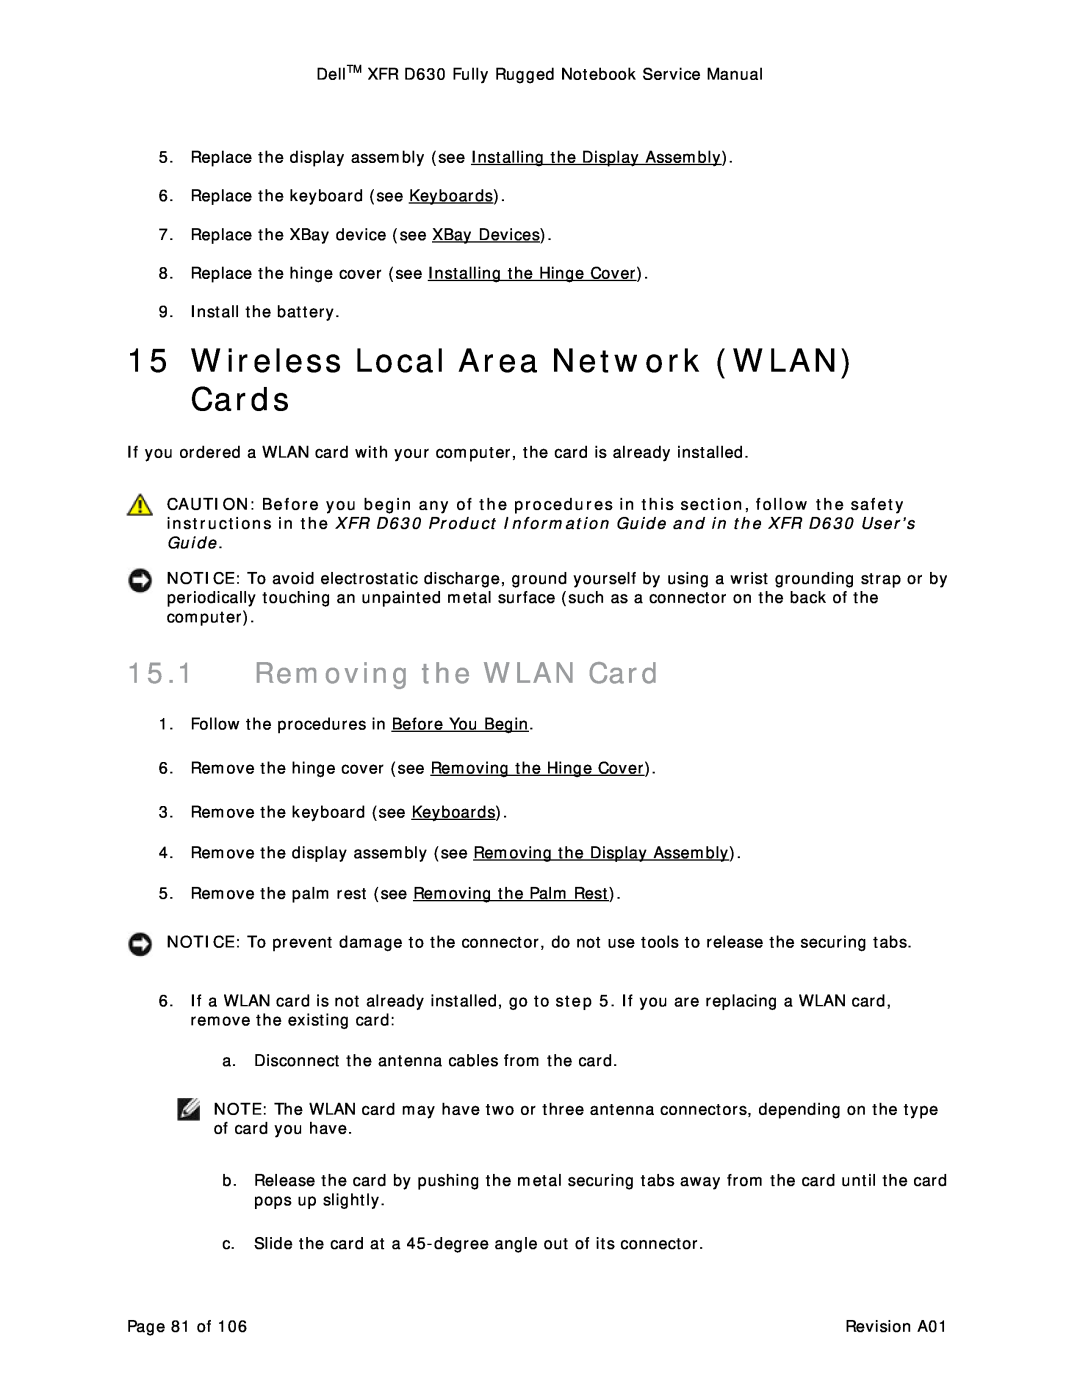 Dell D630 service manual Wireless Local Area Network WLAN Cards, Removing the WLAN Card 